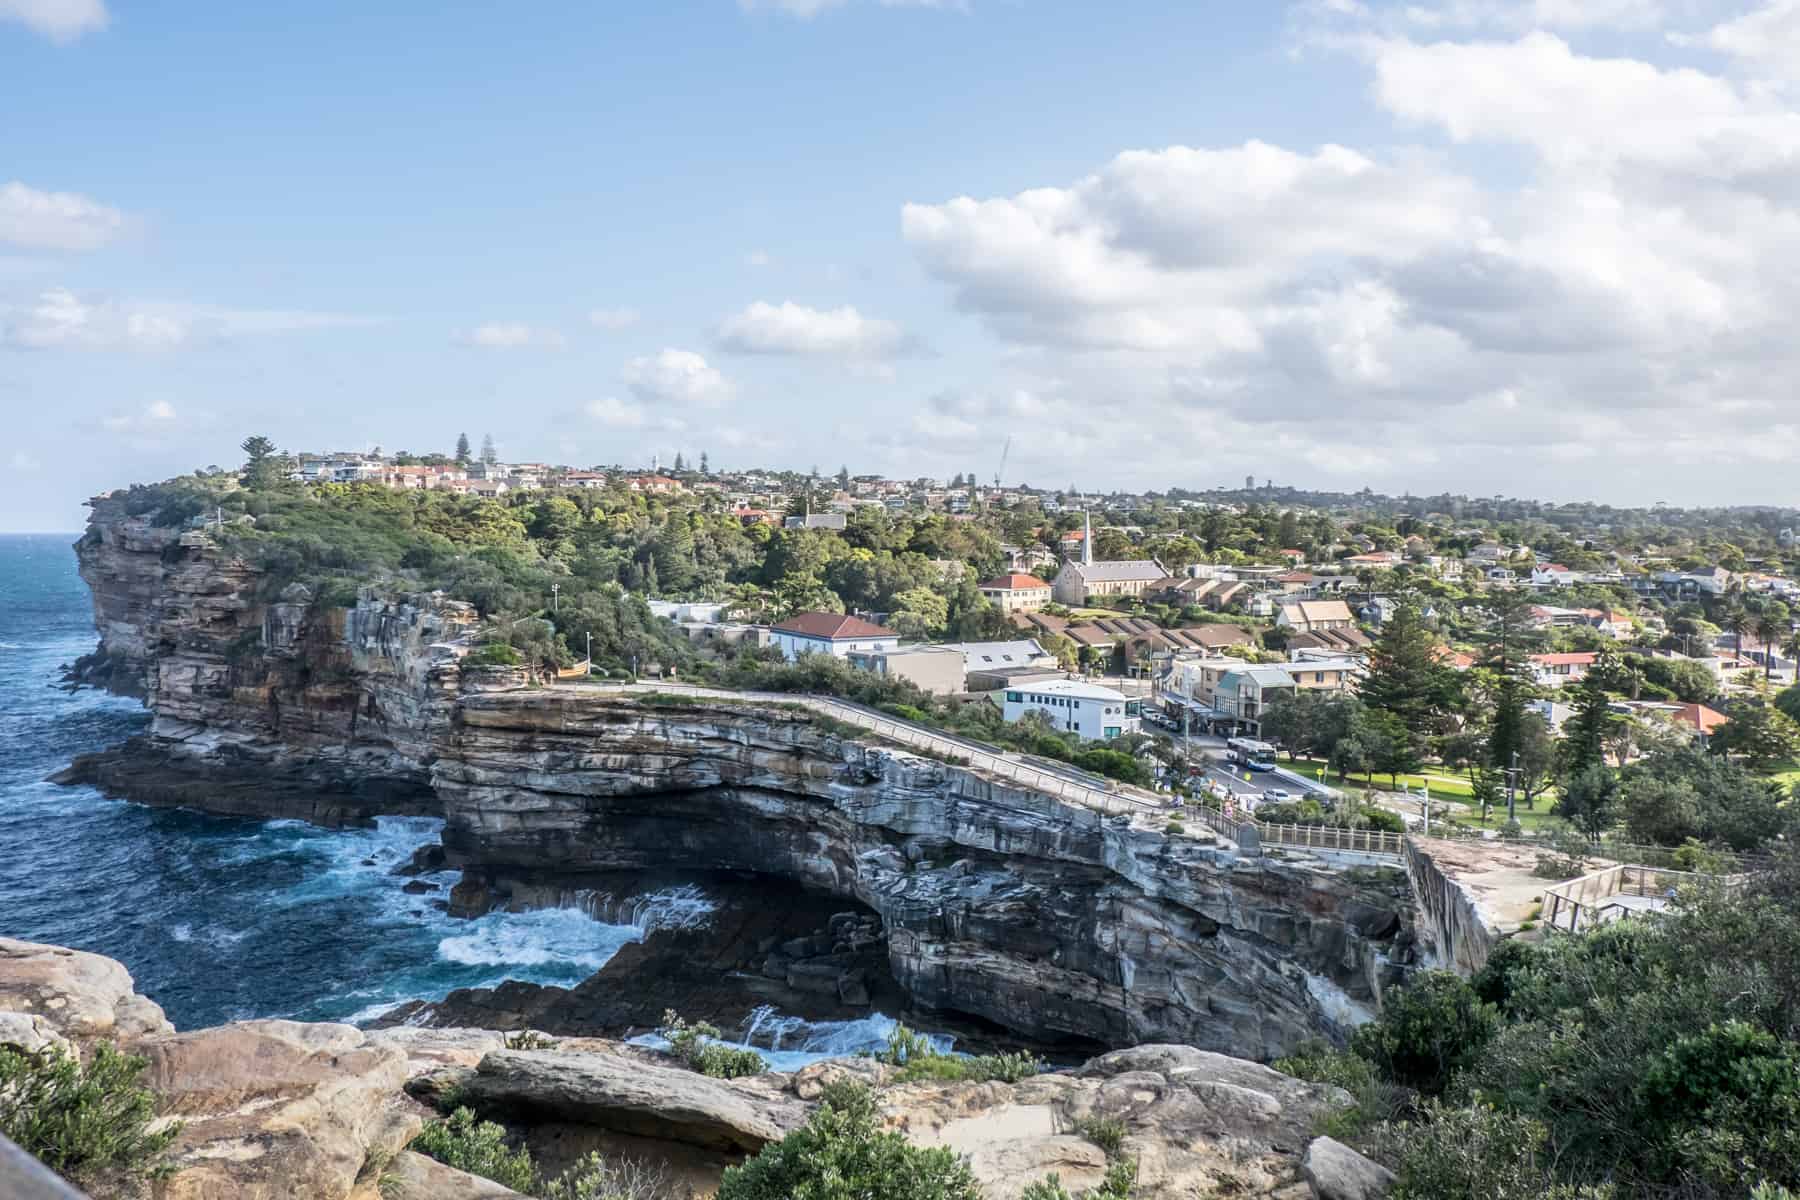 A view of a urban area of Sydney Australia with houses line a cliff top next to the ocean